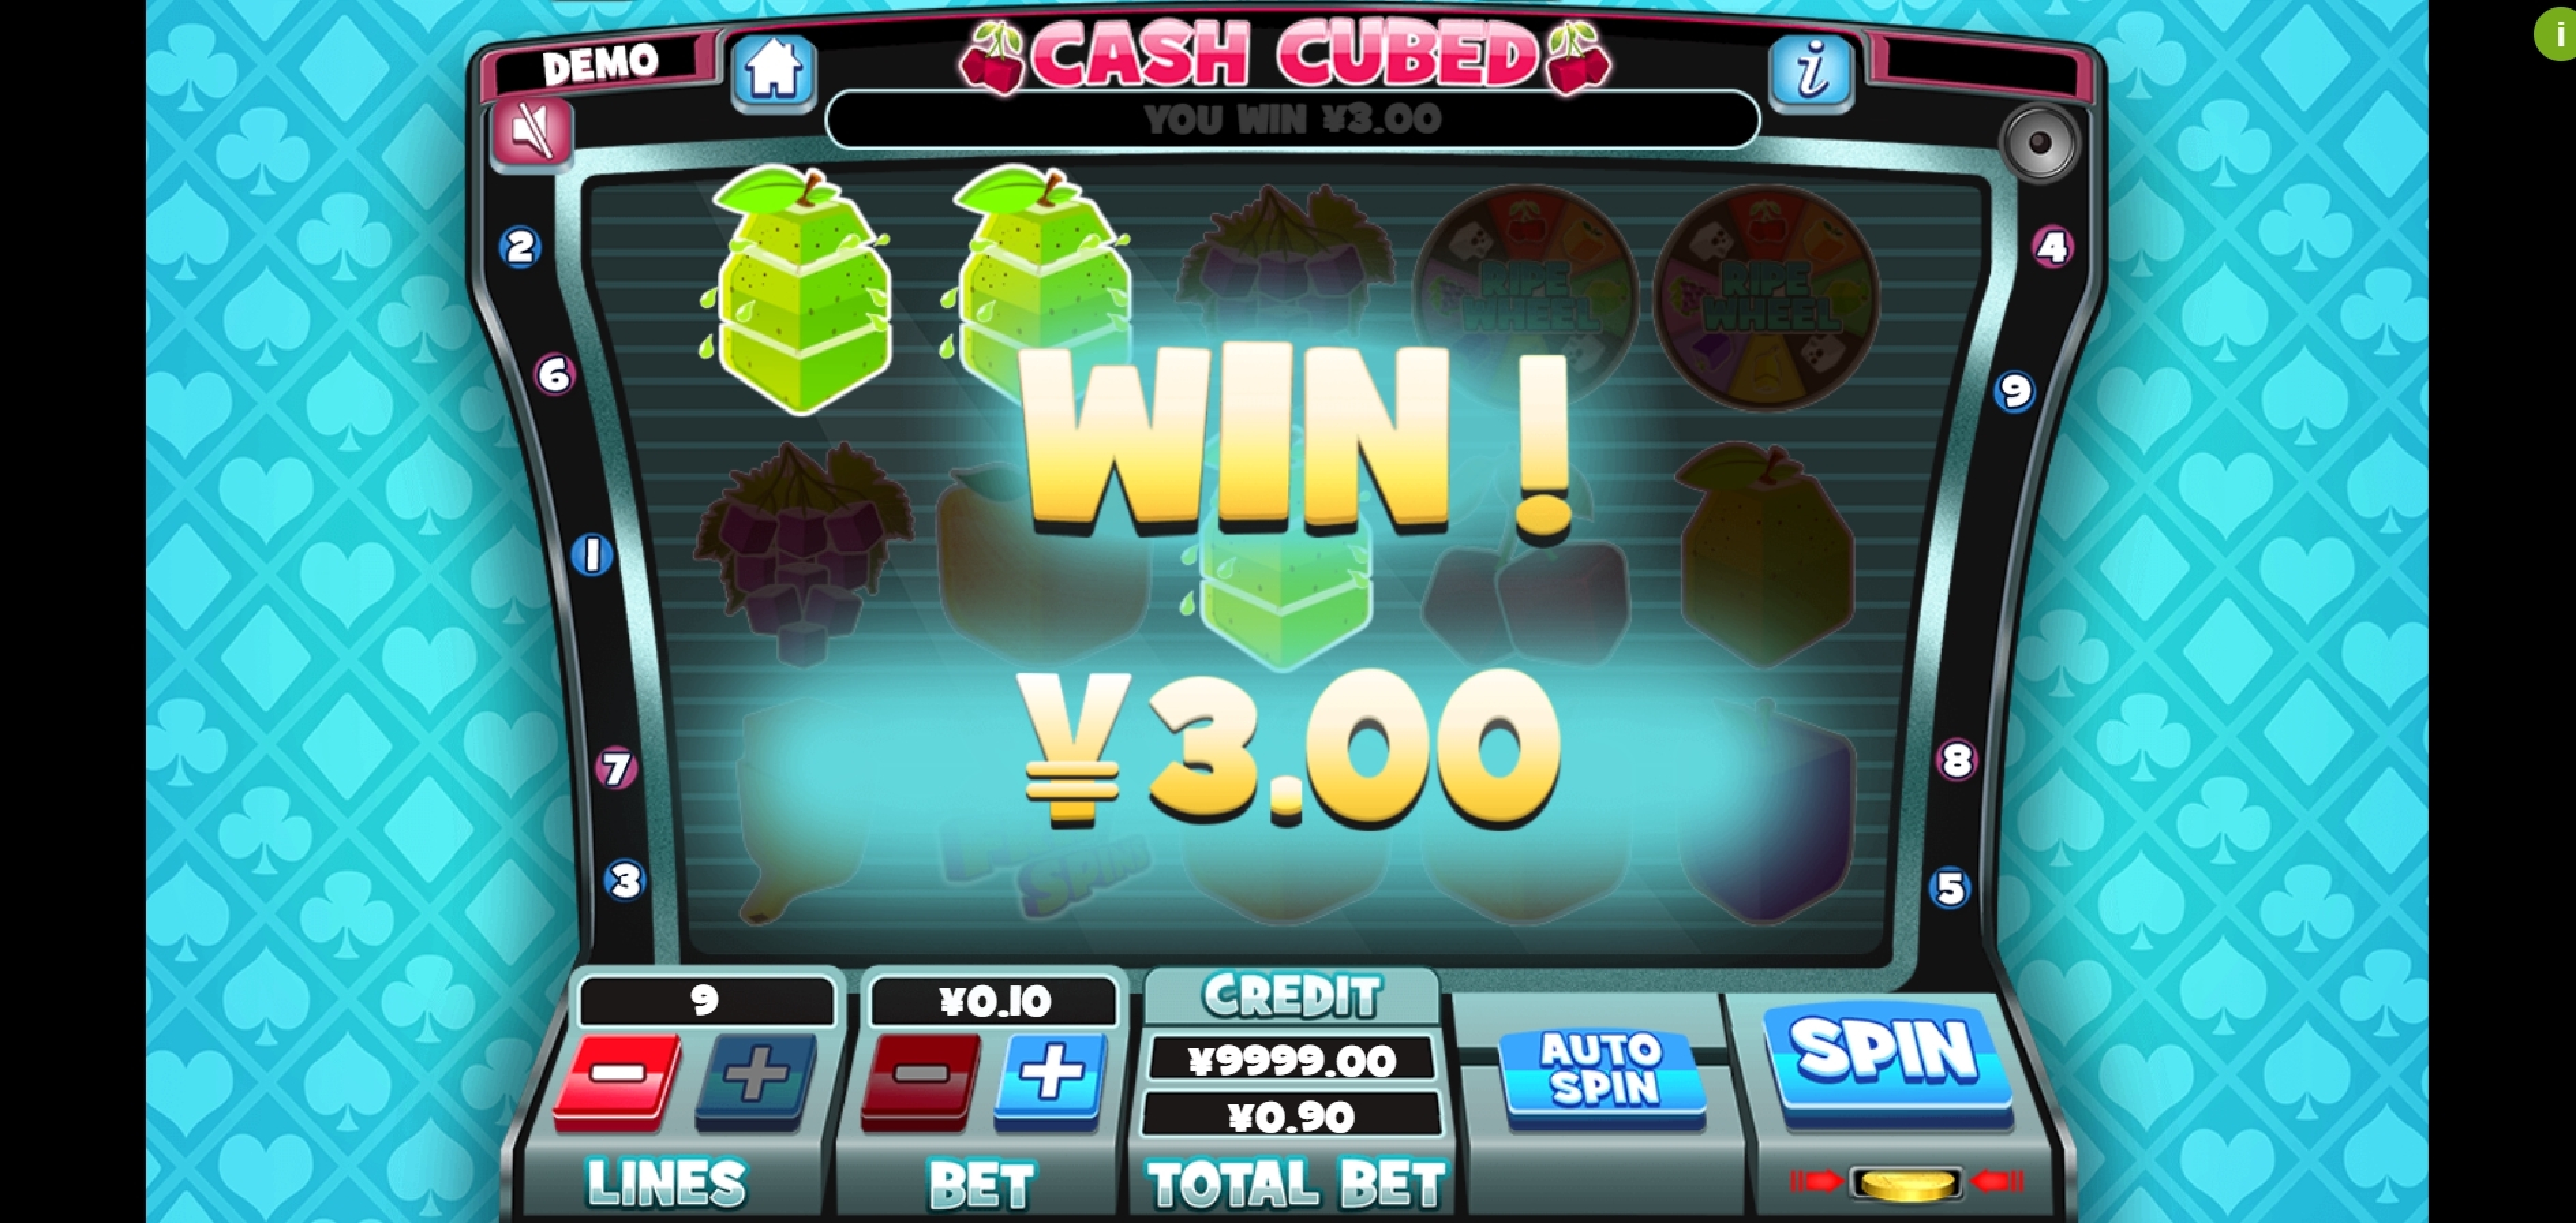 Win Money in Cash Cubed Free Slot Game by Slot Factory